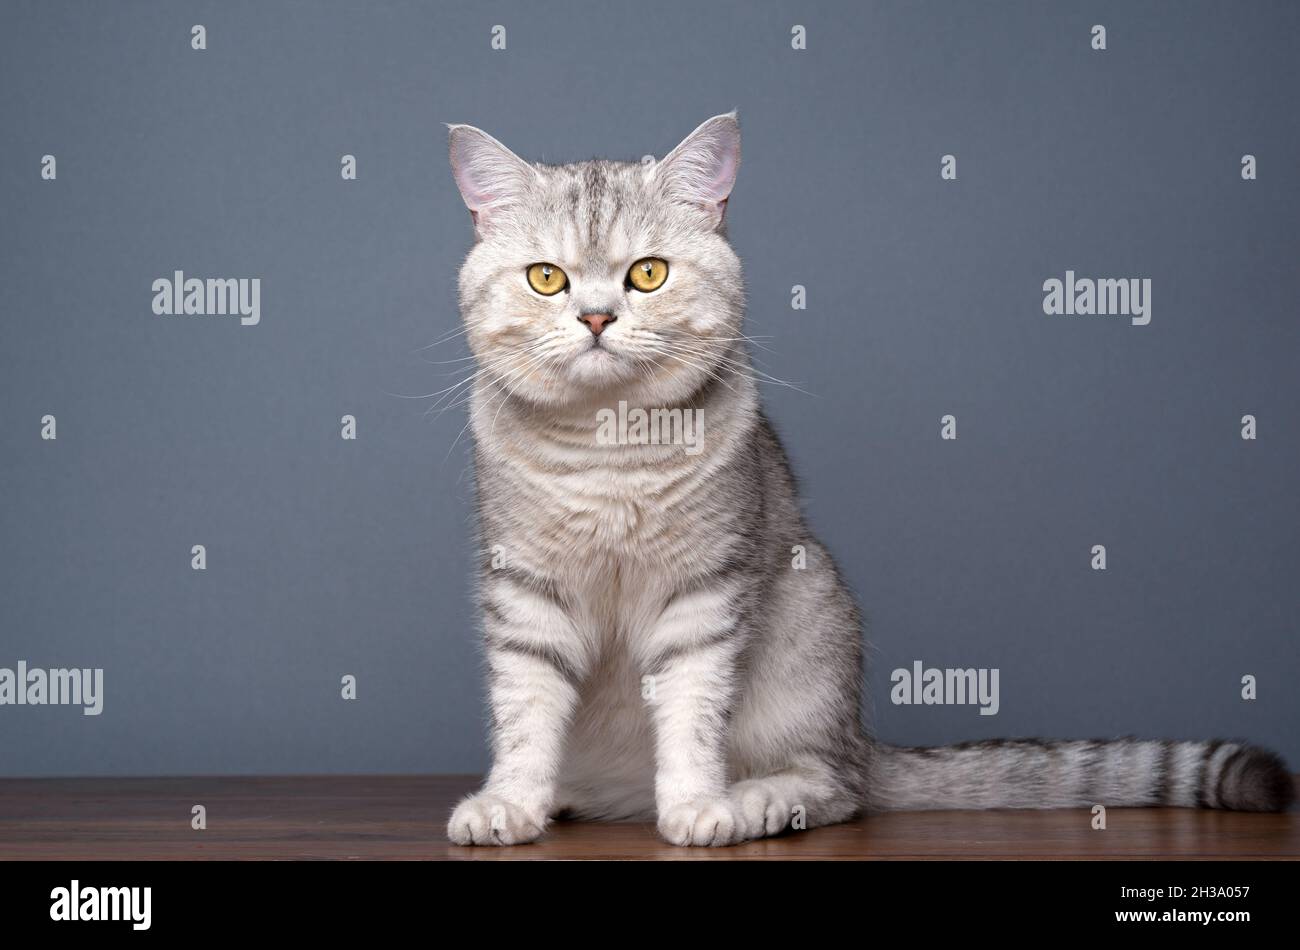 silver tabby shaded british shorthair cat sitting on wooden table on gray background with copy space Stock Photo